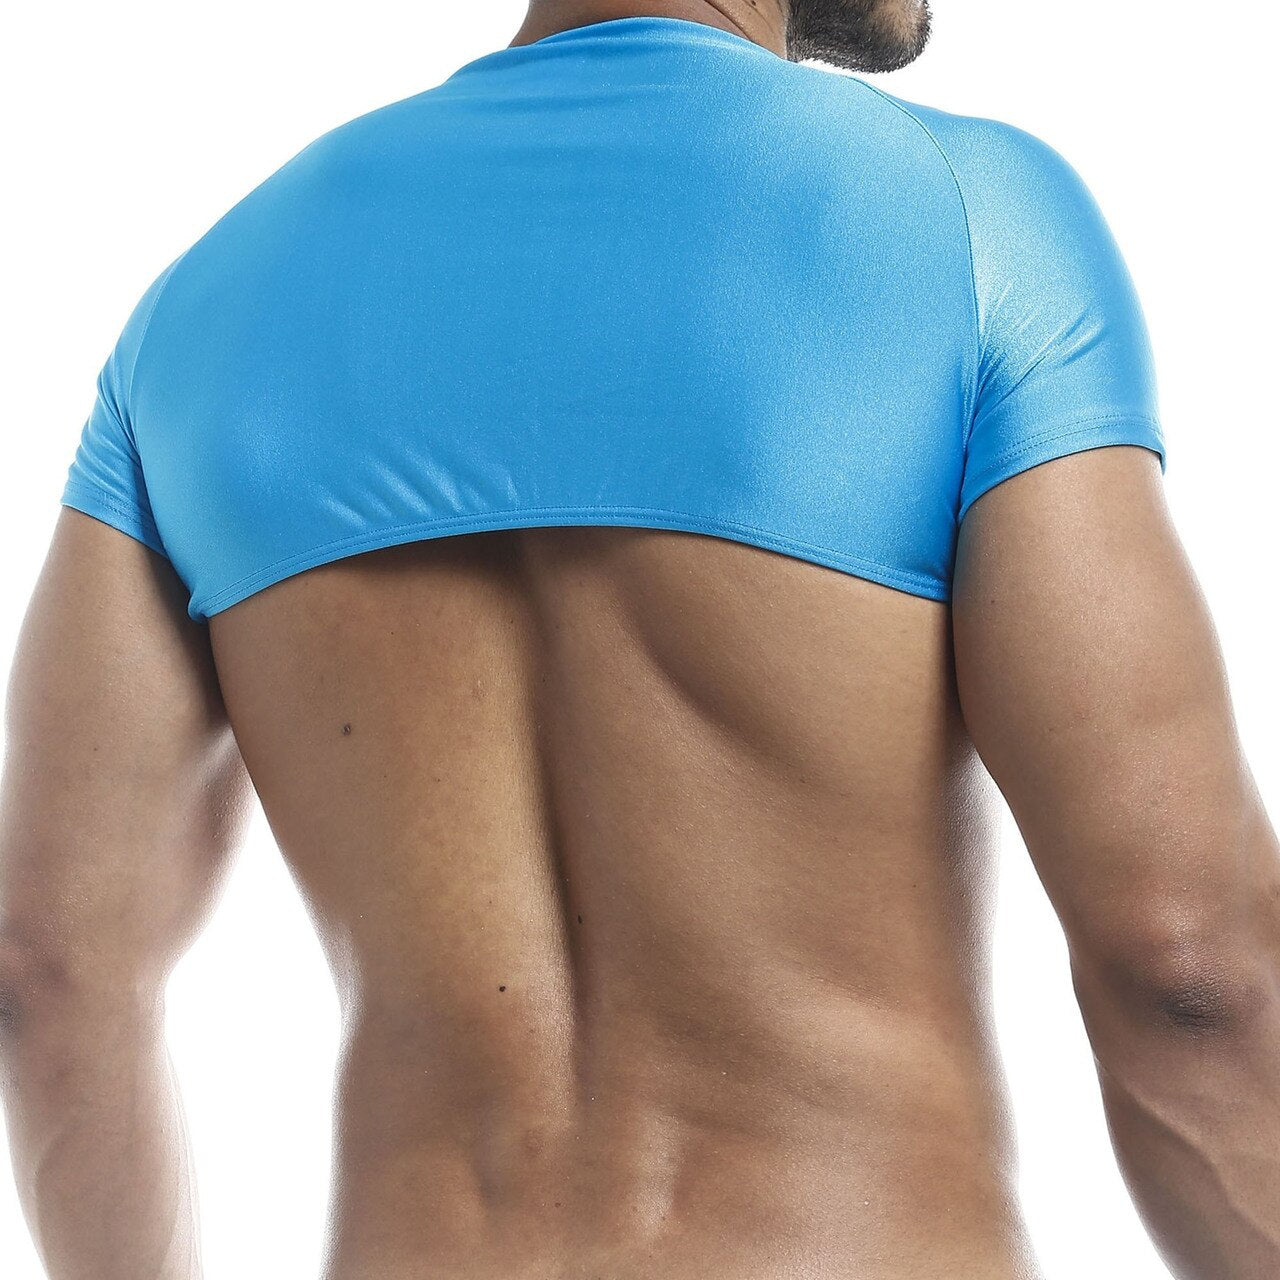 Mens Joe Snyder Stretch Spandex Posing Top with Cap Sleeves Turquoise